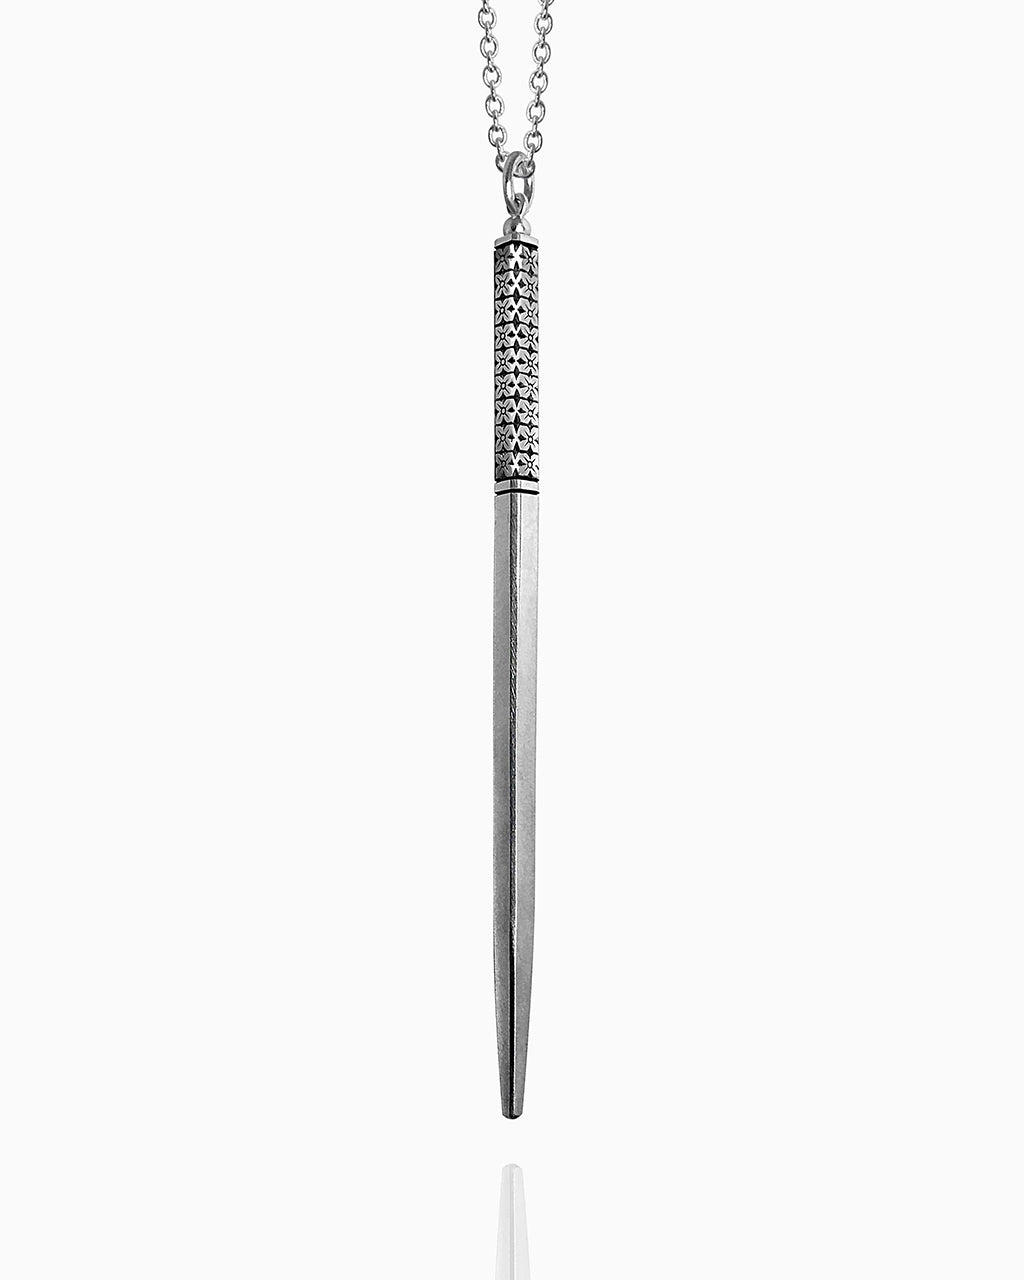 A sterling silver wand necklace hanging against a white background. This minimal wand has three engraved lines to define the handle—one at the top and two at the bottom. In between the lines, there is a floral pattern hand engraved into all four sides of the wand.